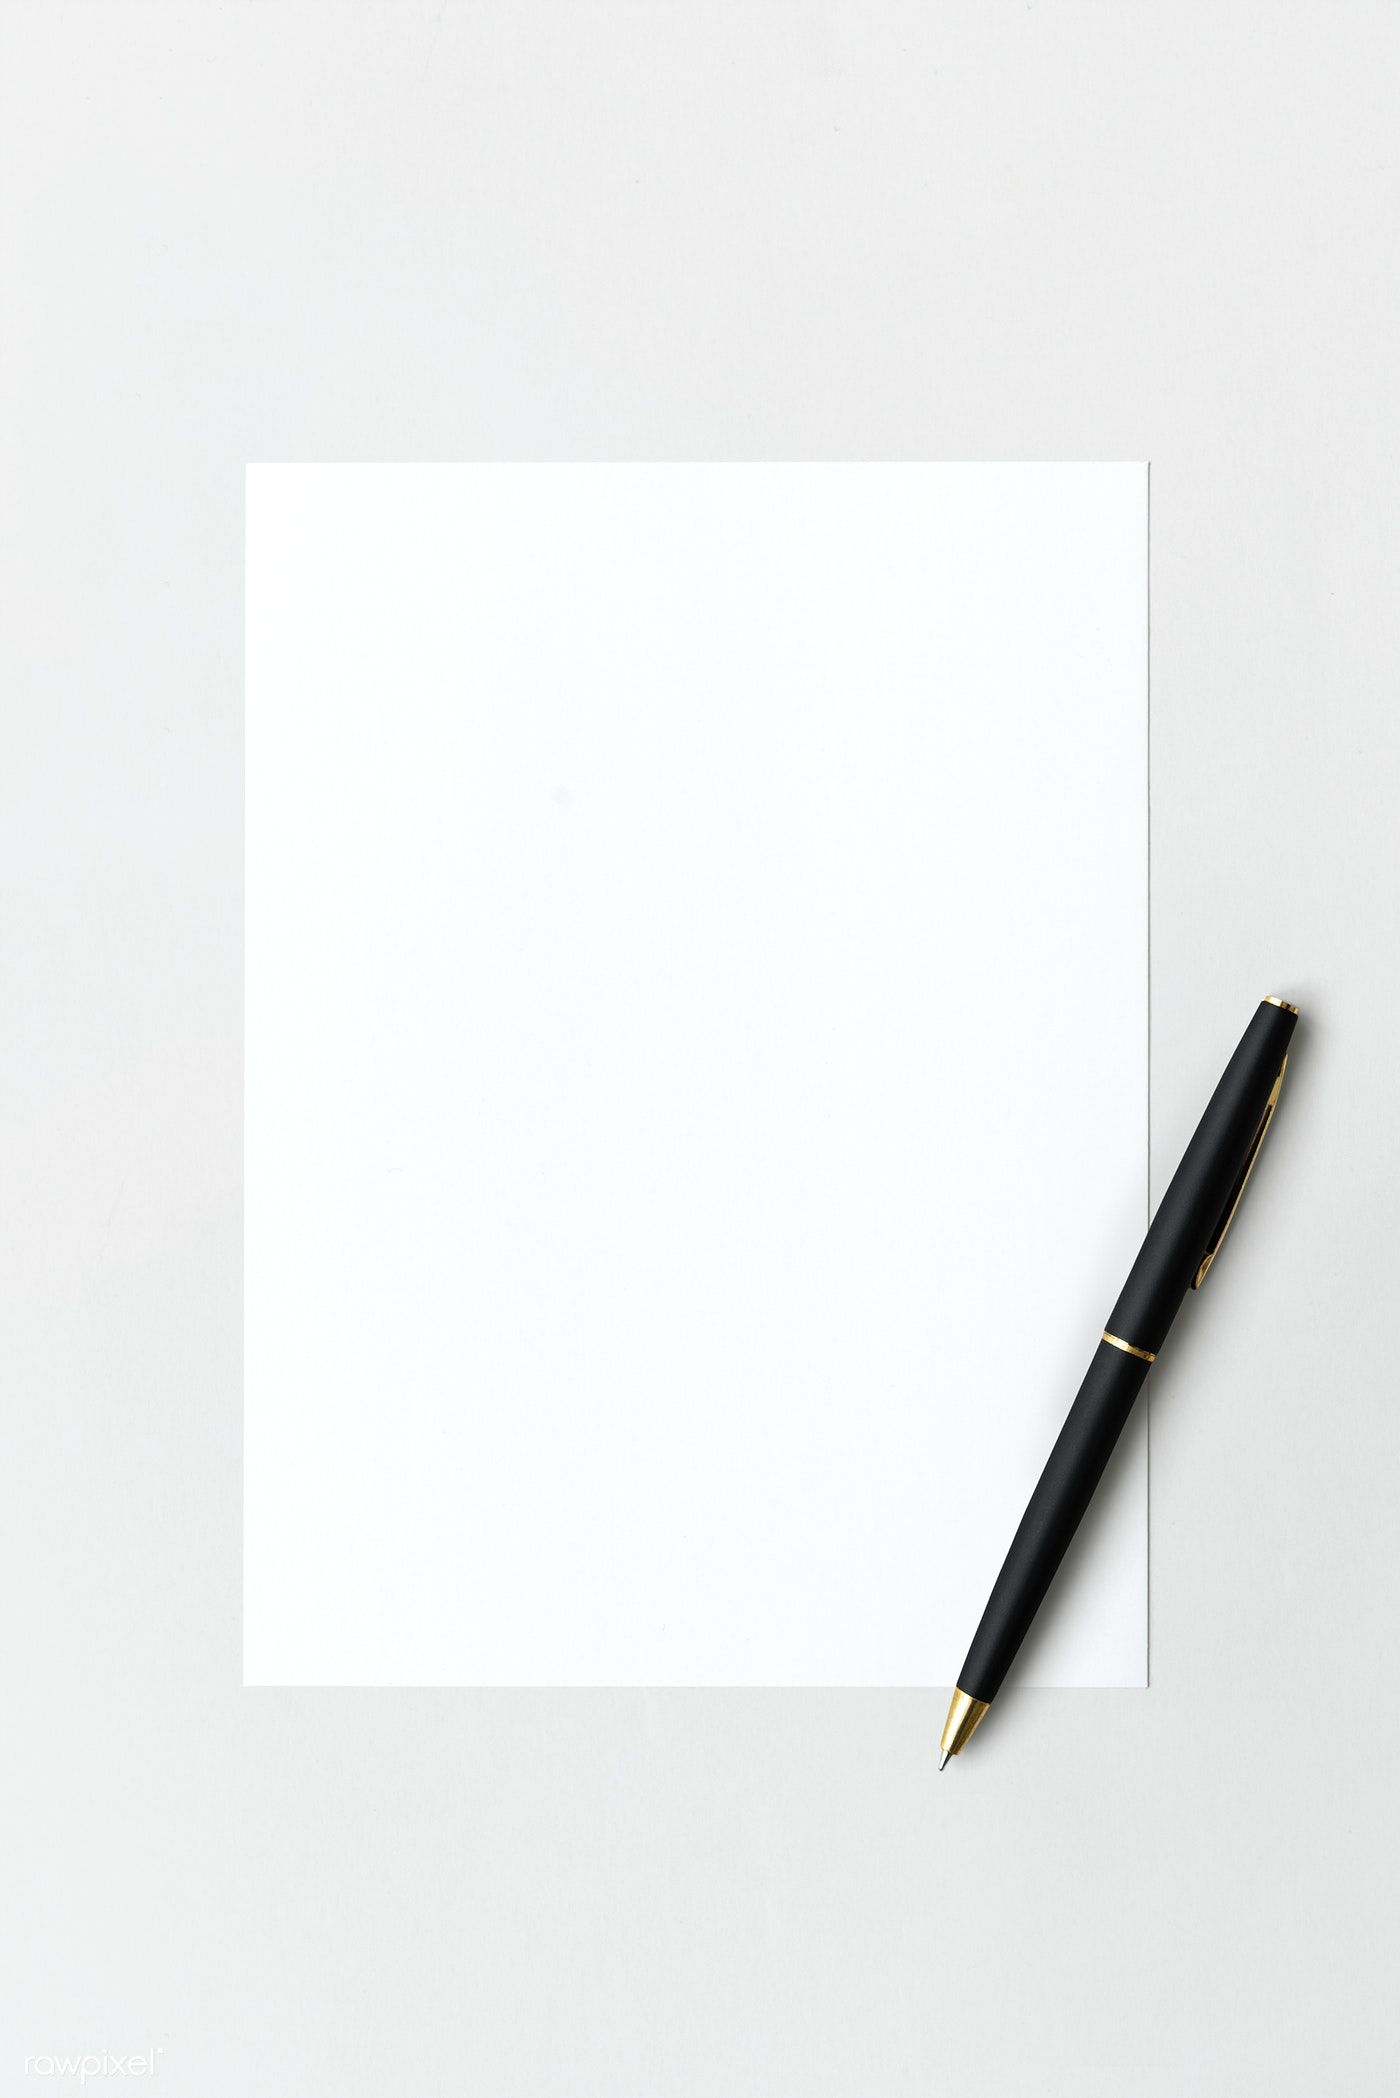 Download premium psd of Blank white paper with black pen 1202057